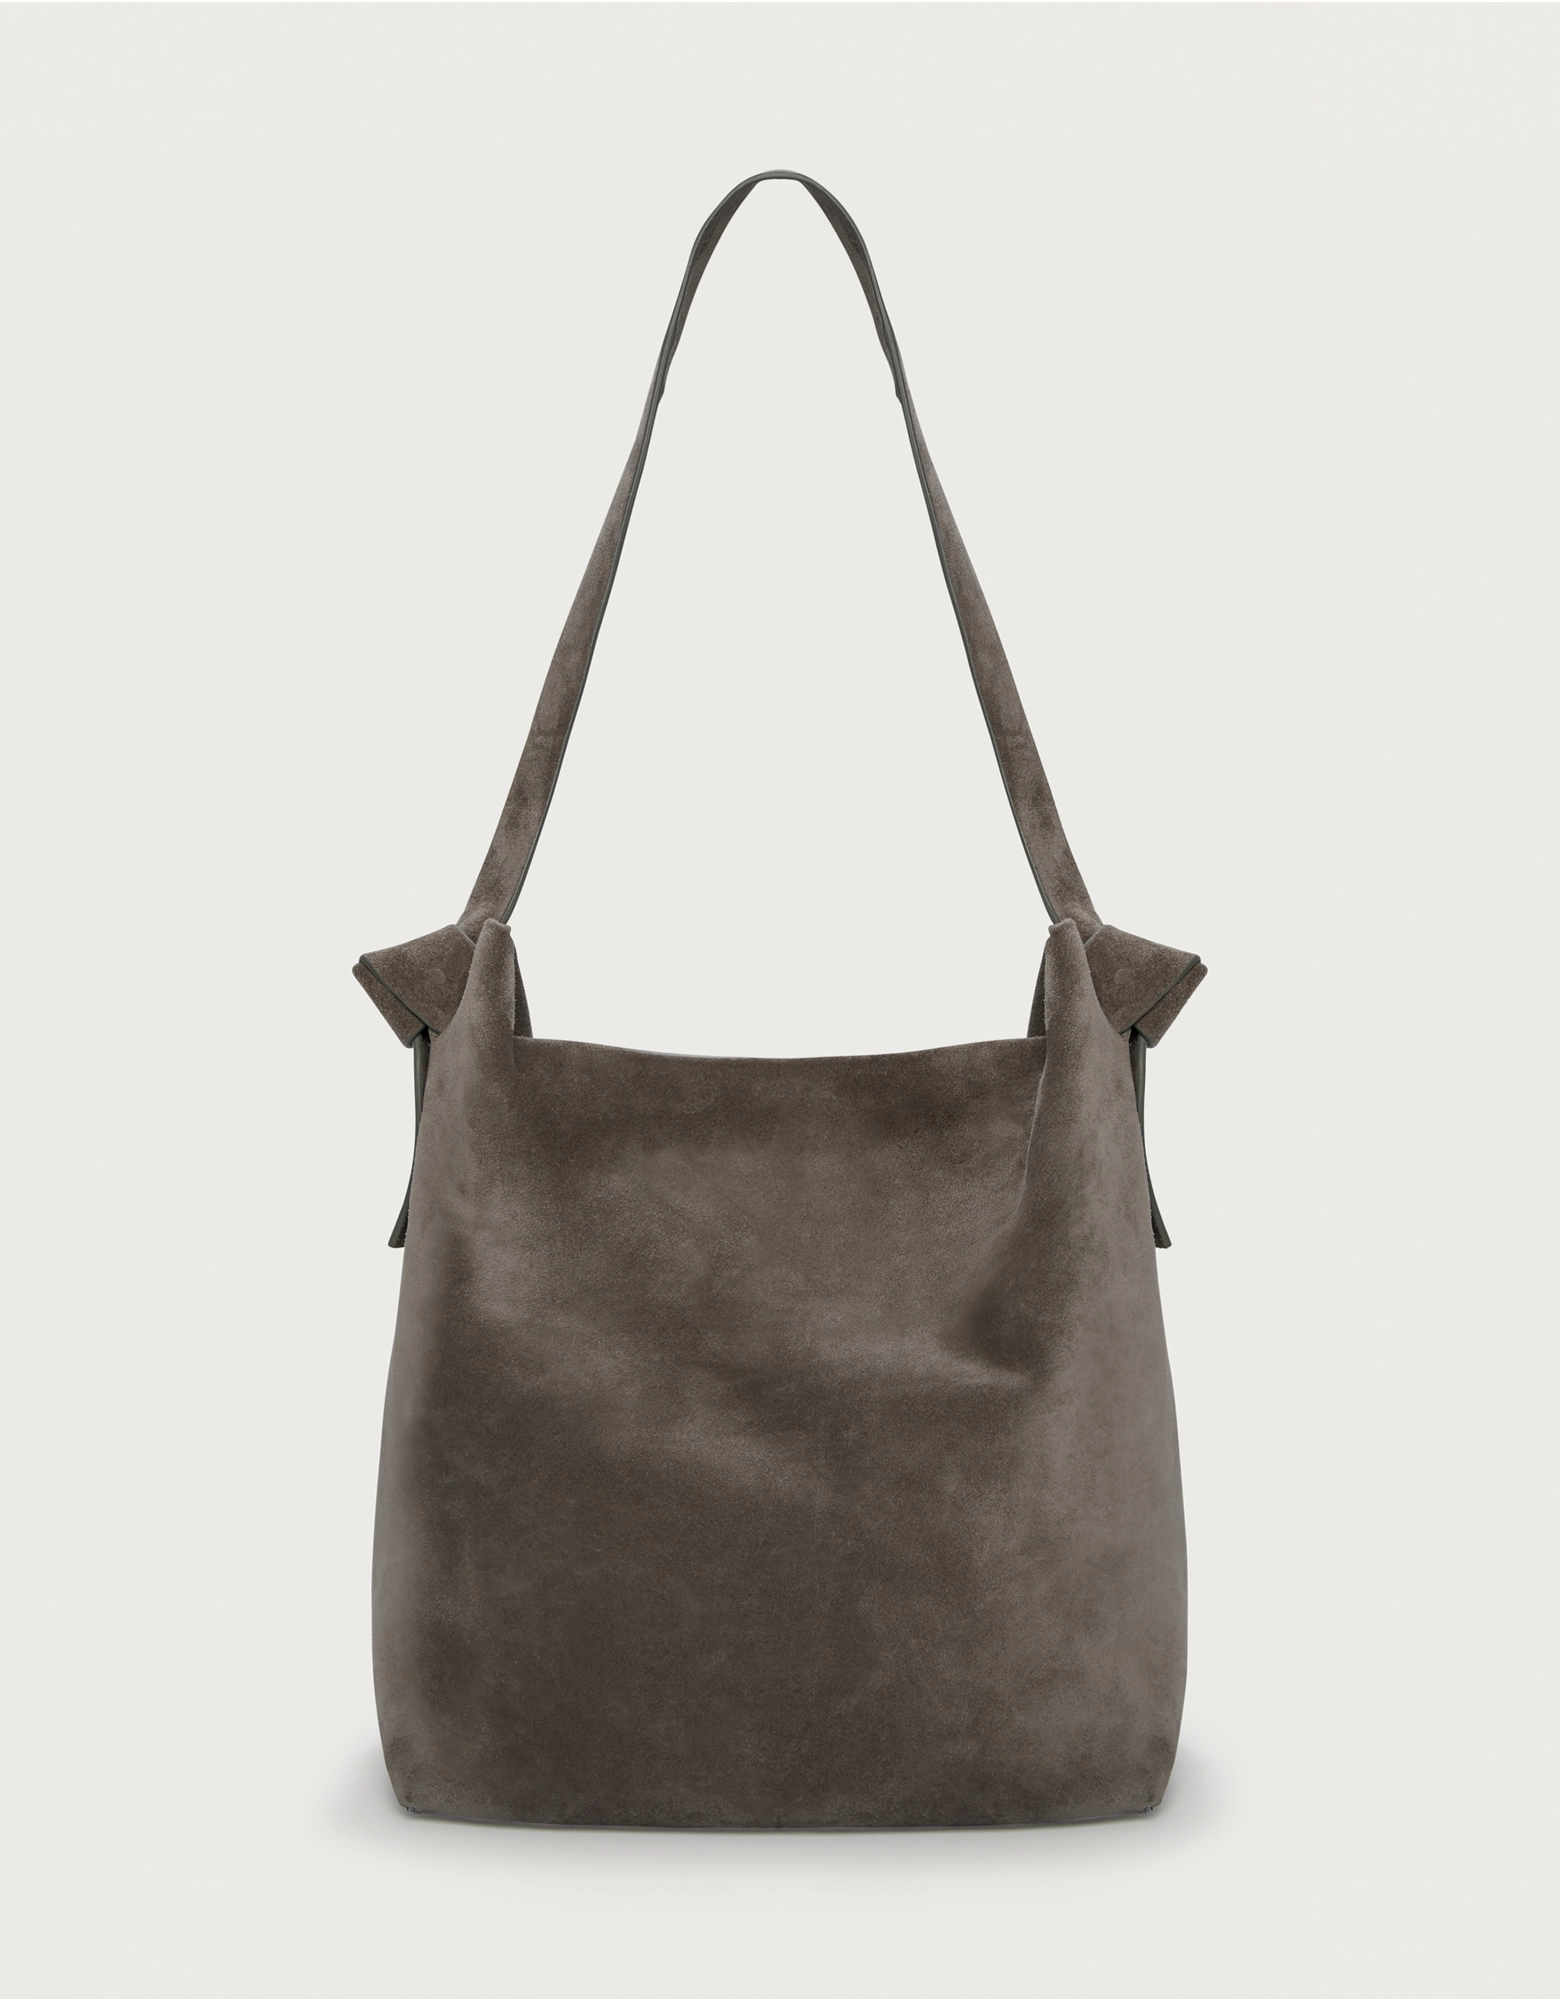 Pembroke Knot Large Suede Tote